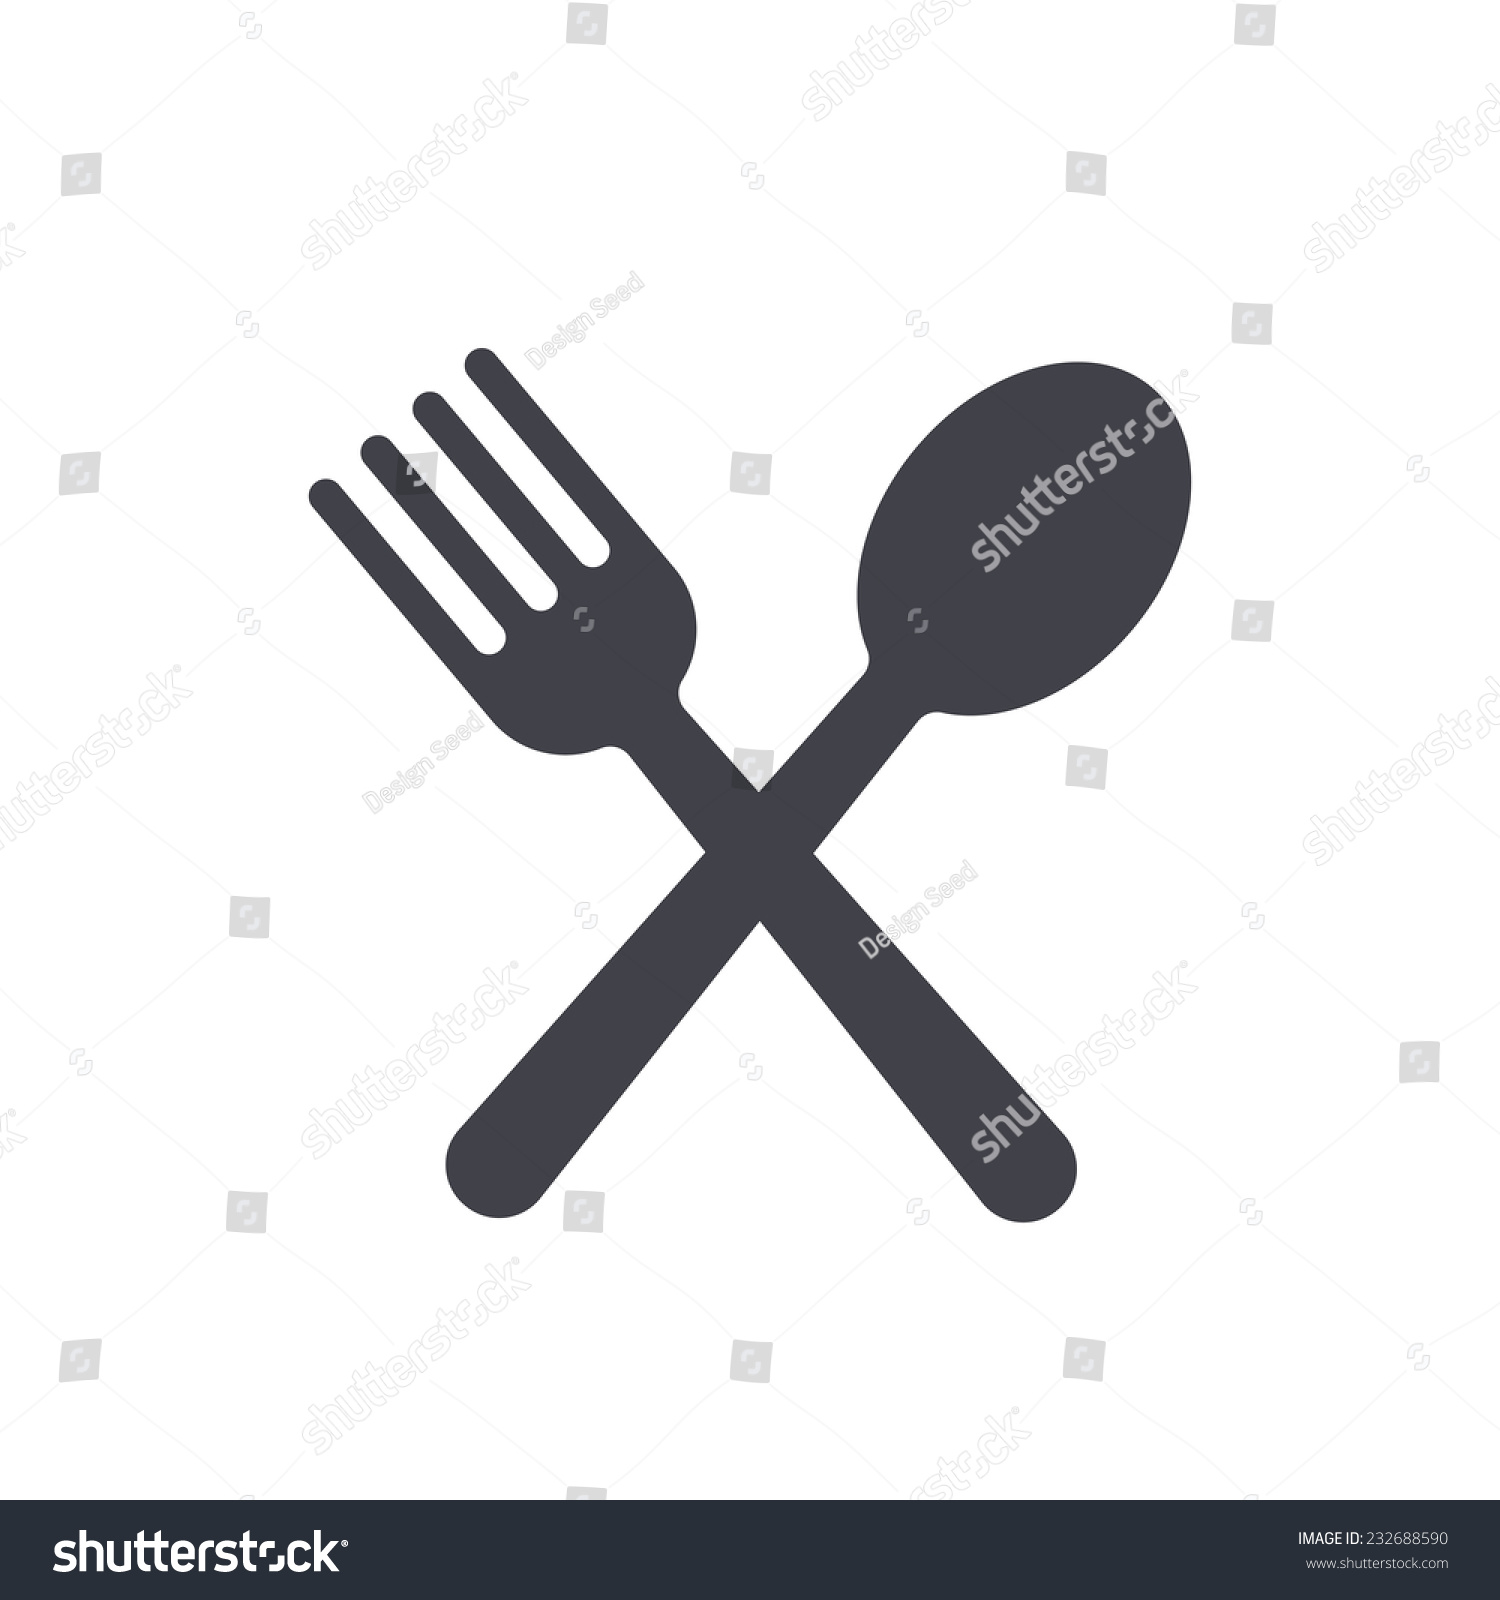 Fork And Spoon Icon Stock Vector 232688590 : Shutterstock